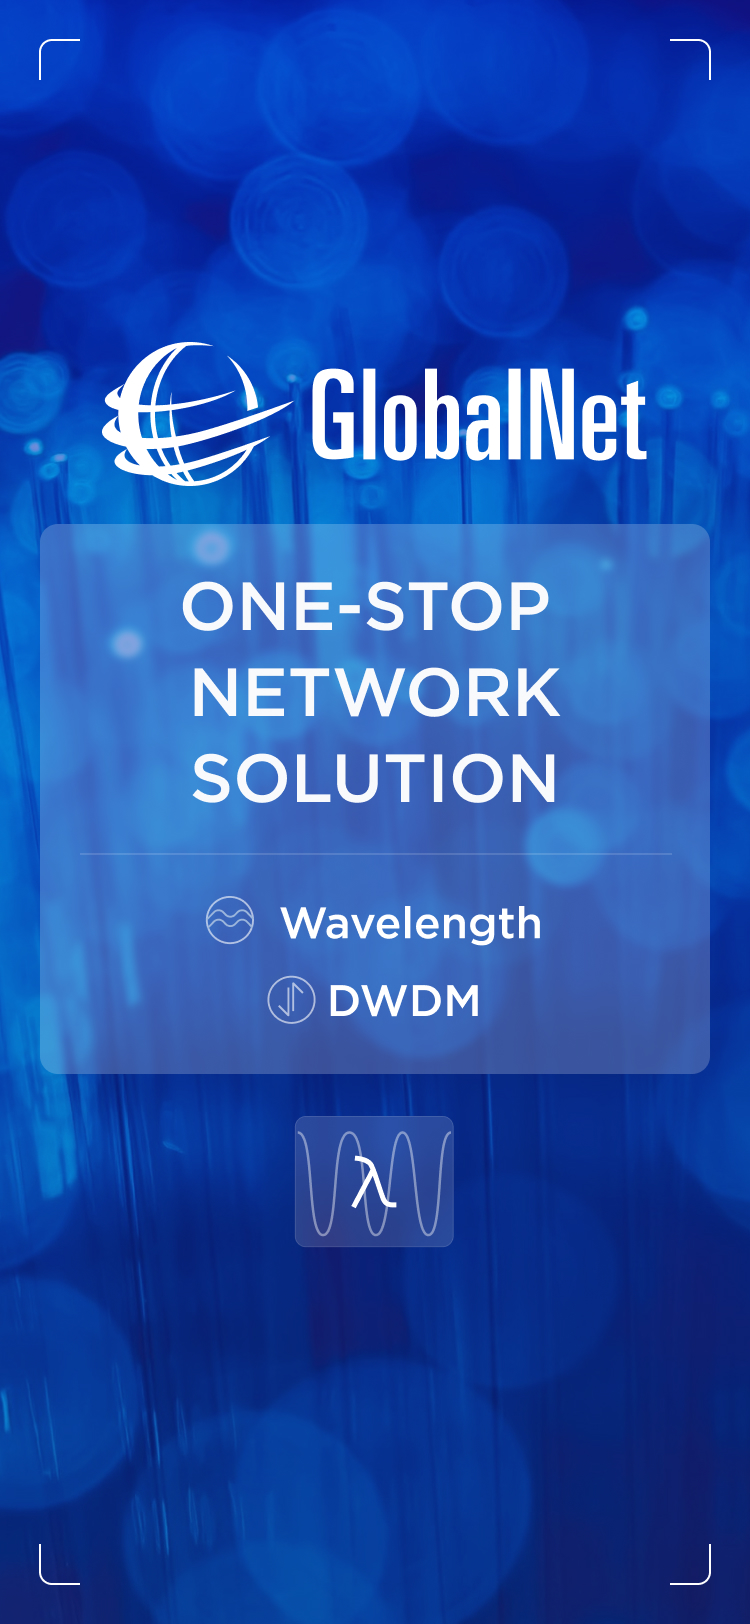 One-stop network solution: Wavelength and DWDM